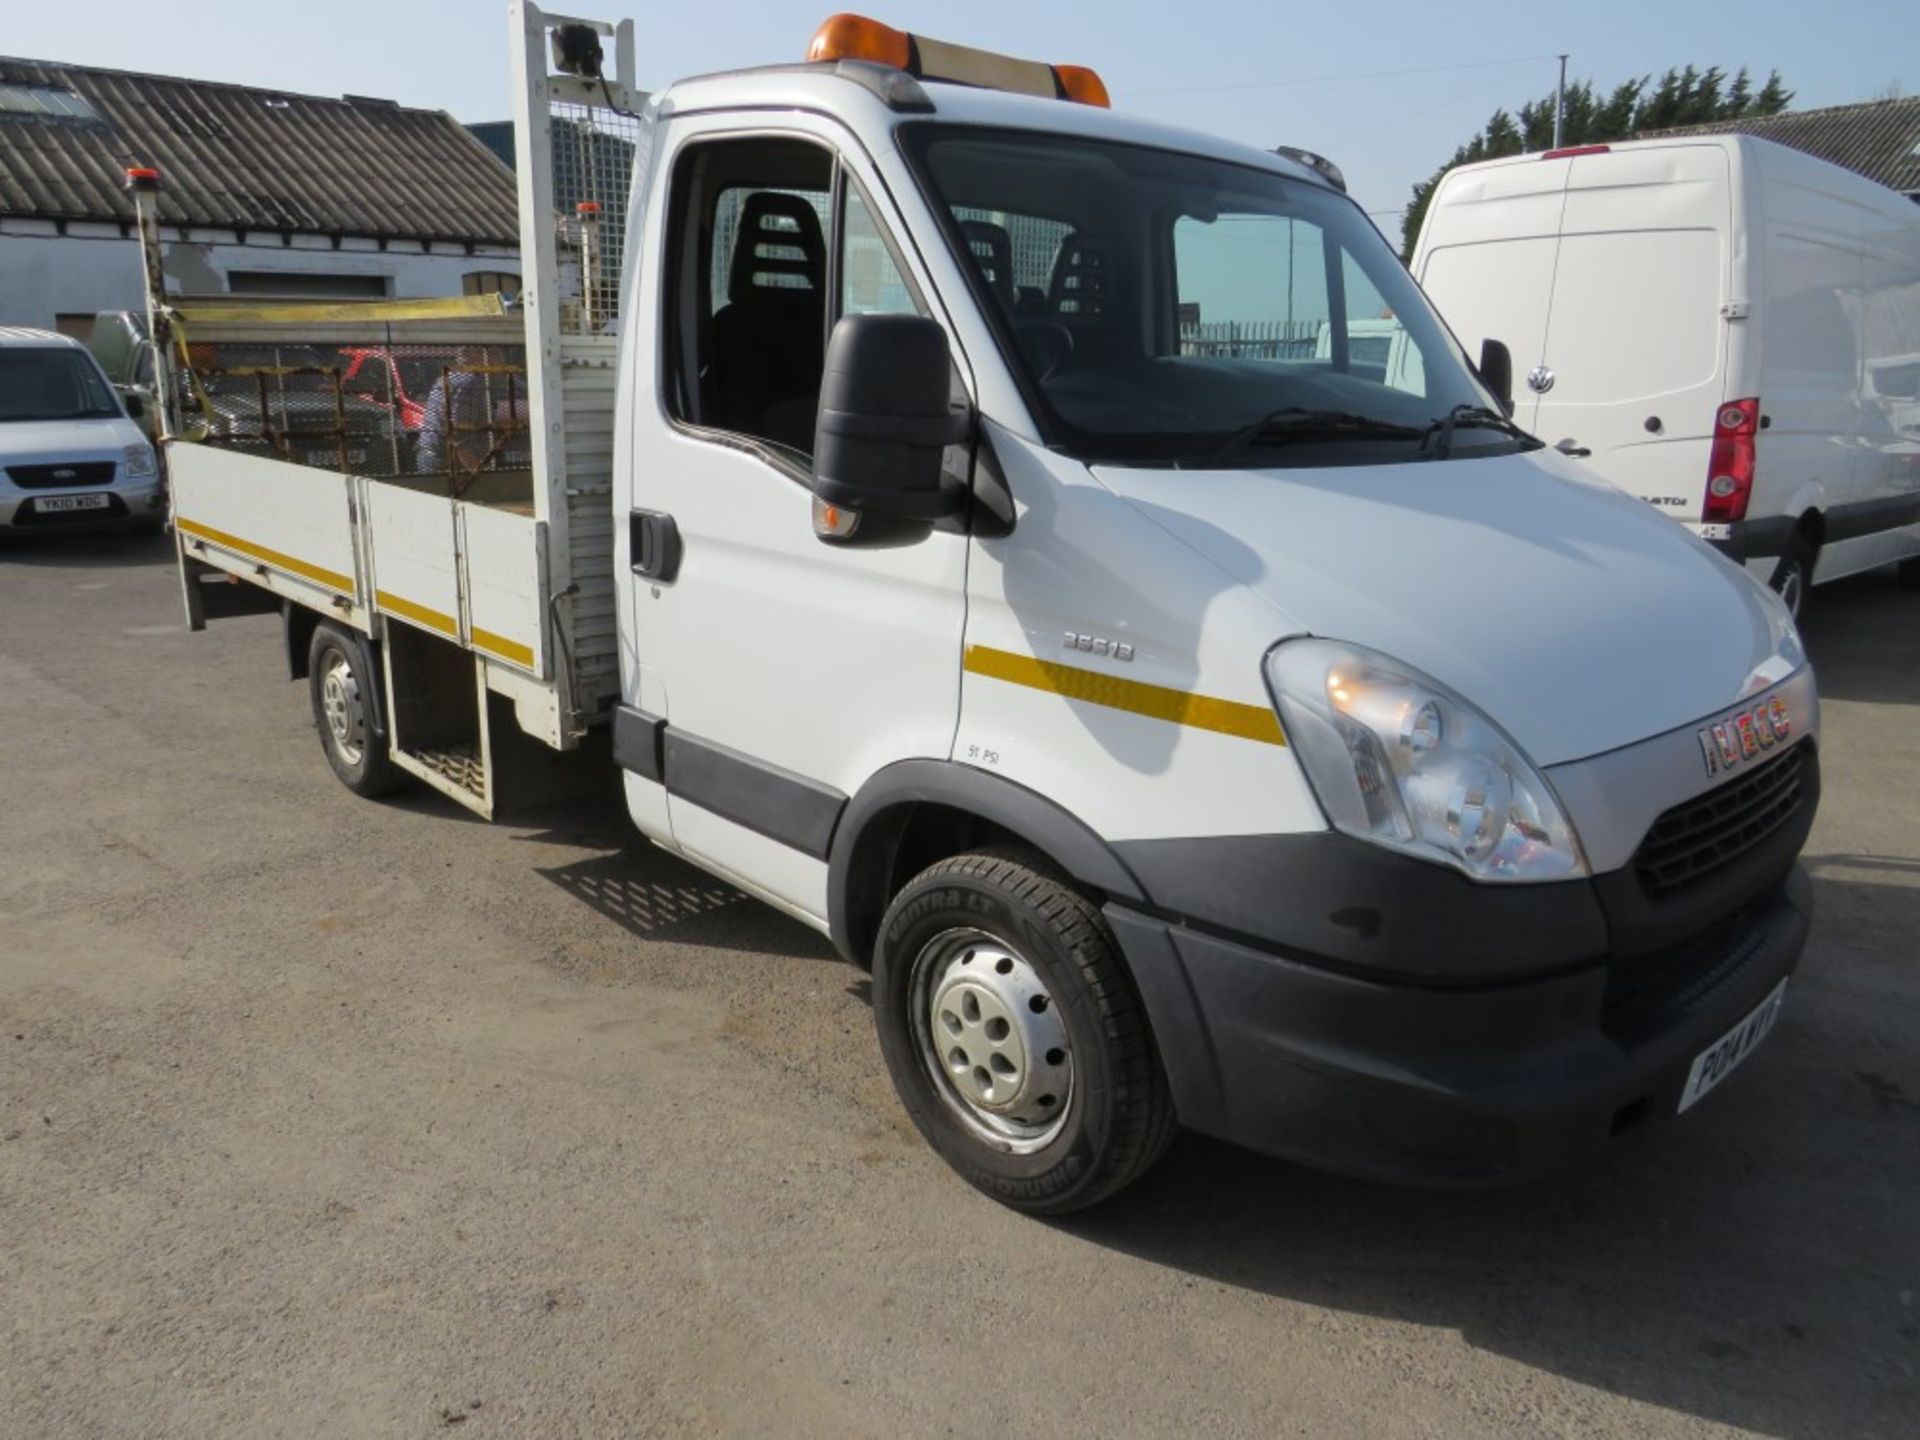 14 reg IVECO 35S13 DROPSIDE C/W TAIL LIFT, 1ST REG 03/14, TEST 03/22, 103921M WARRANTED, V5 HERE,